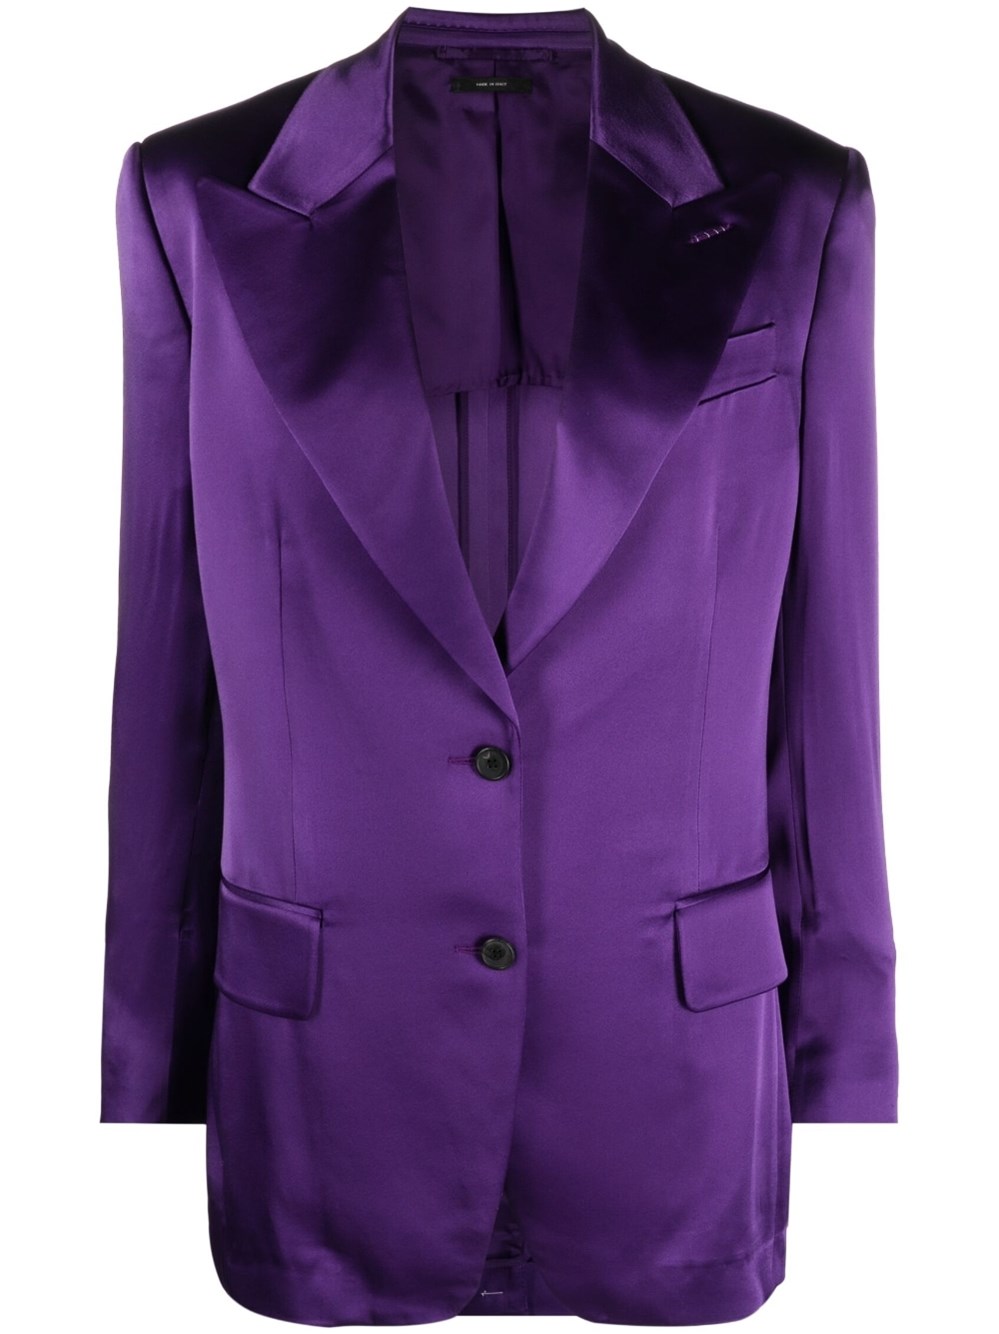 tom ford JACKET available on montiboutique.com - 54555